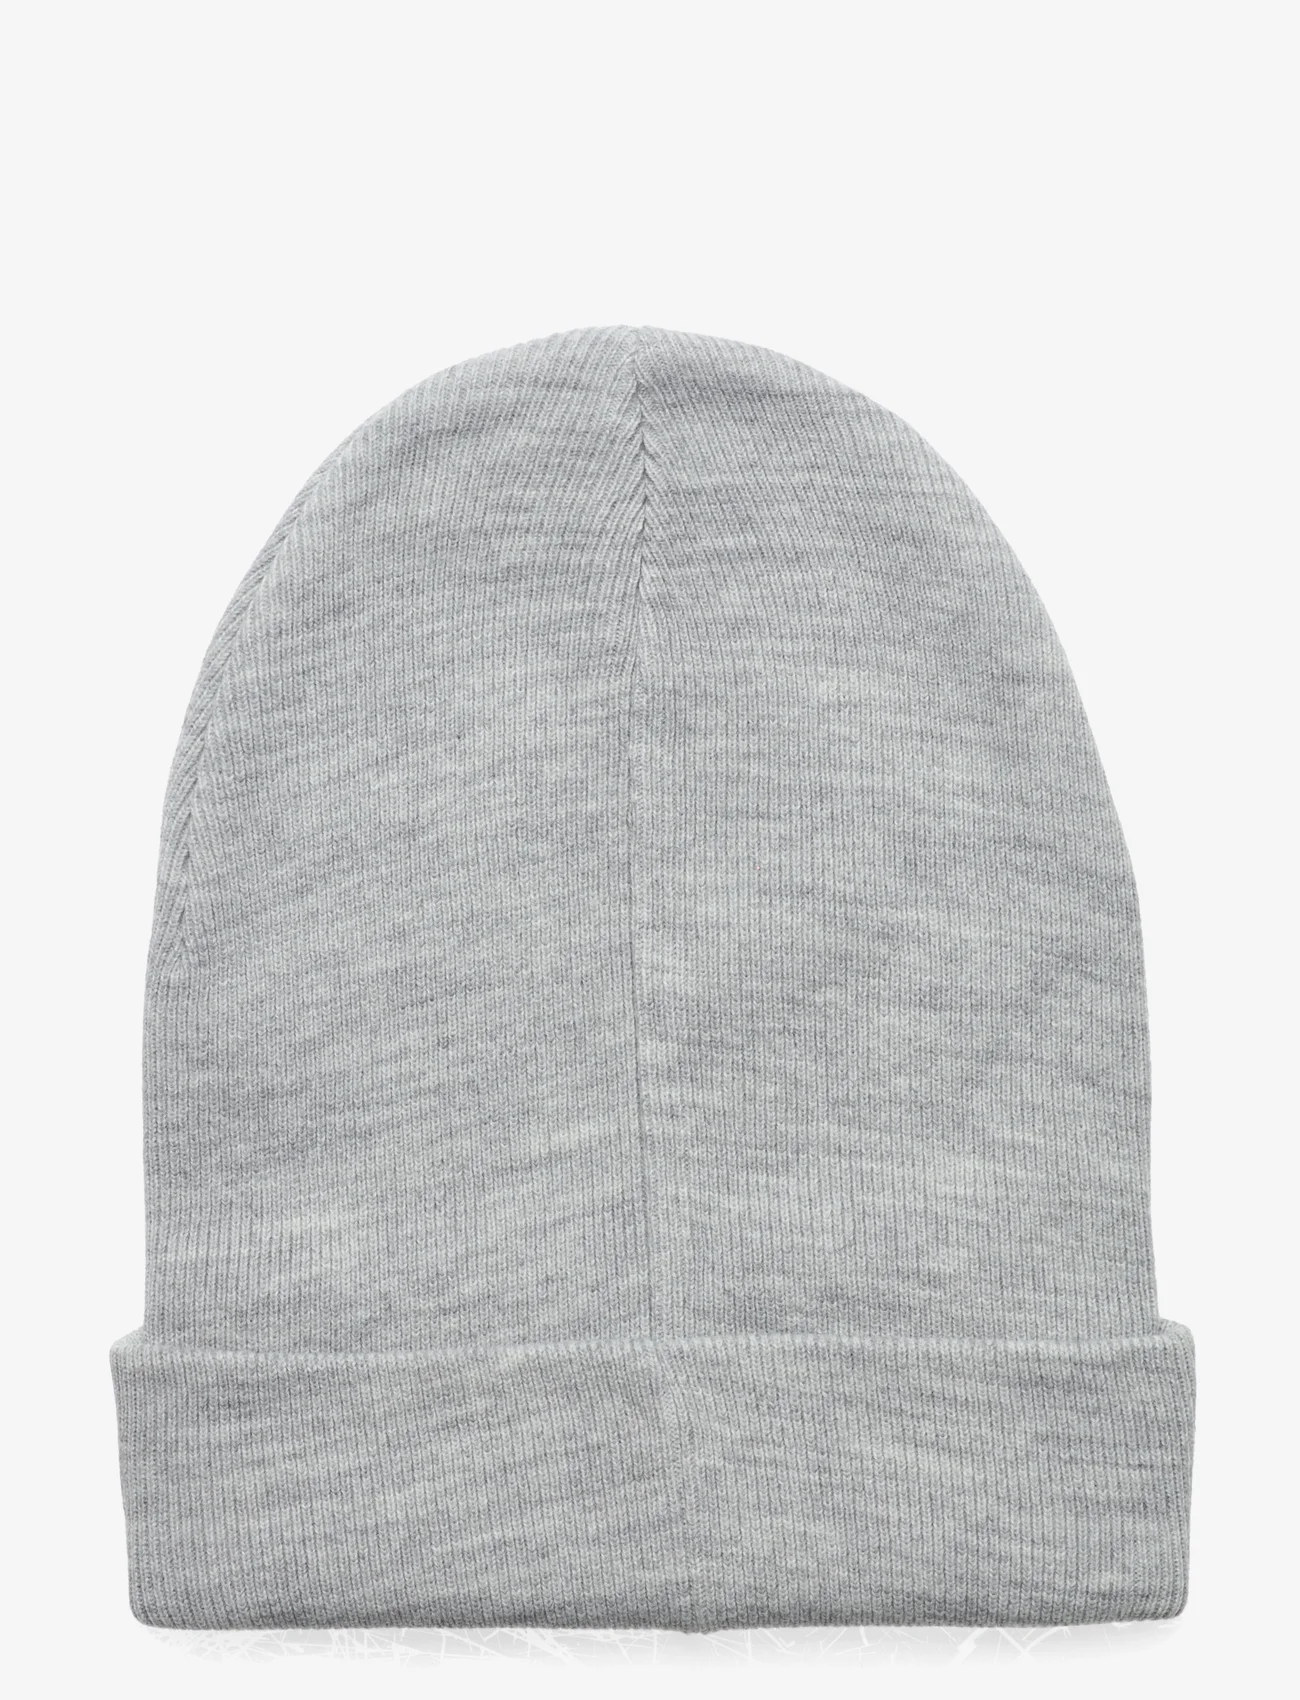 Kronstadt - Beanie recycled - nordic style - grey mel - 1